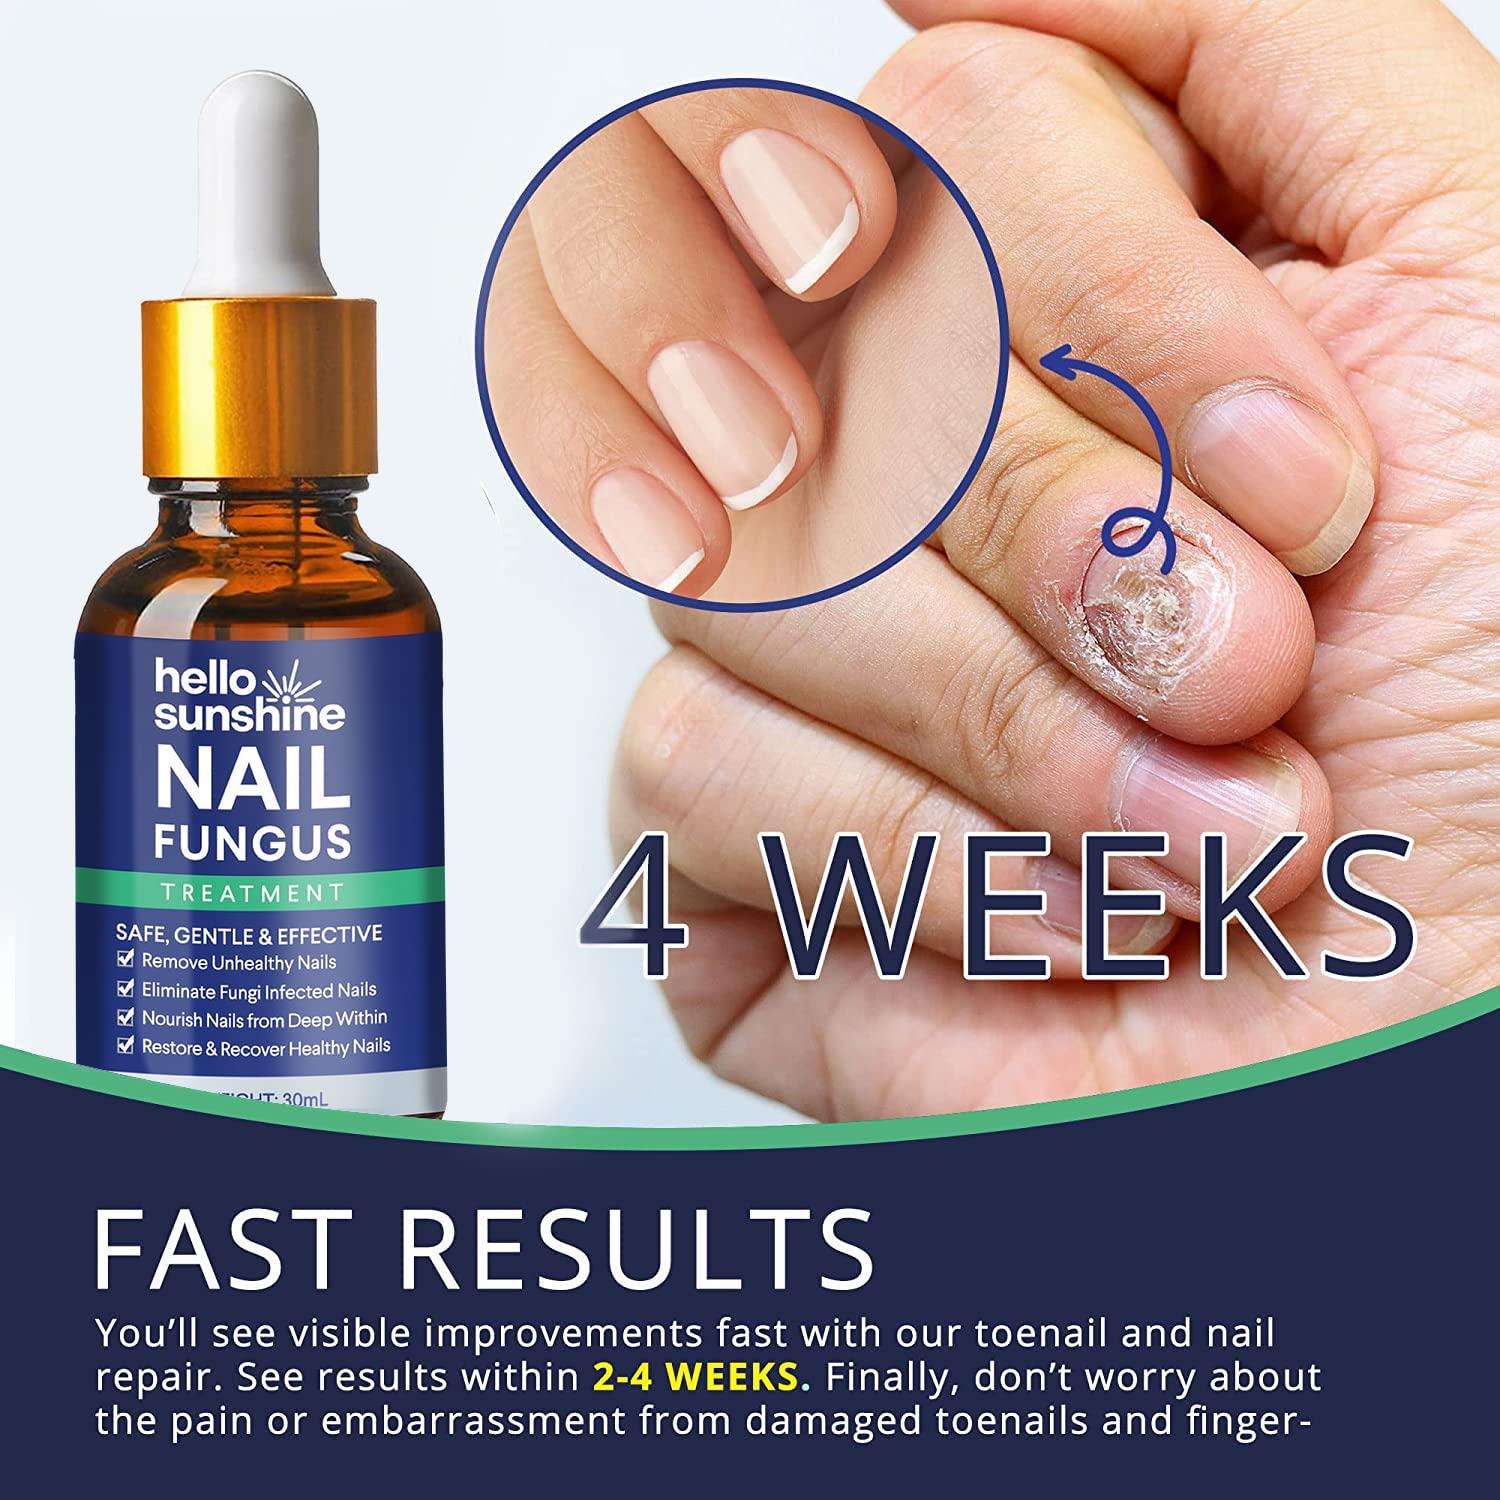 What Is The Best Way To Get Rid Of Nail Fungus? | CLOCIP - Cipla